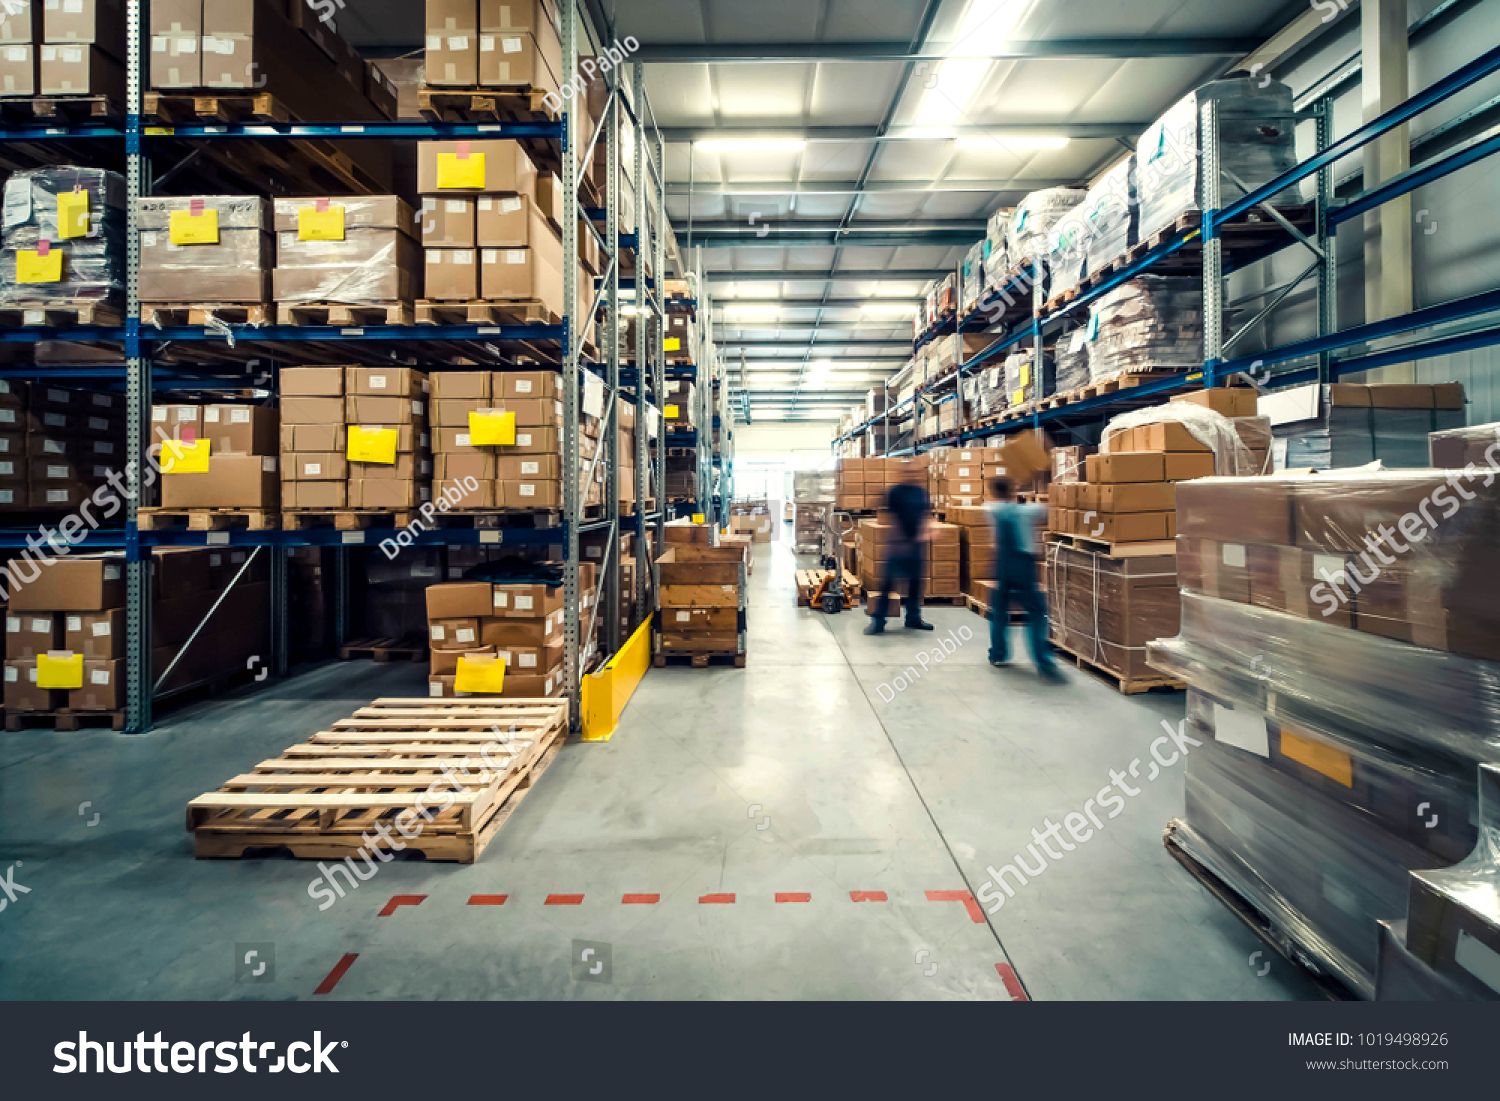 warehouse interior with shelves, pallets and boxes #1019498926